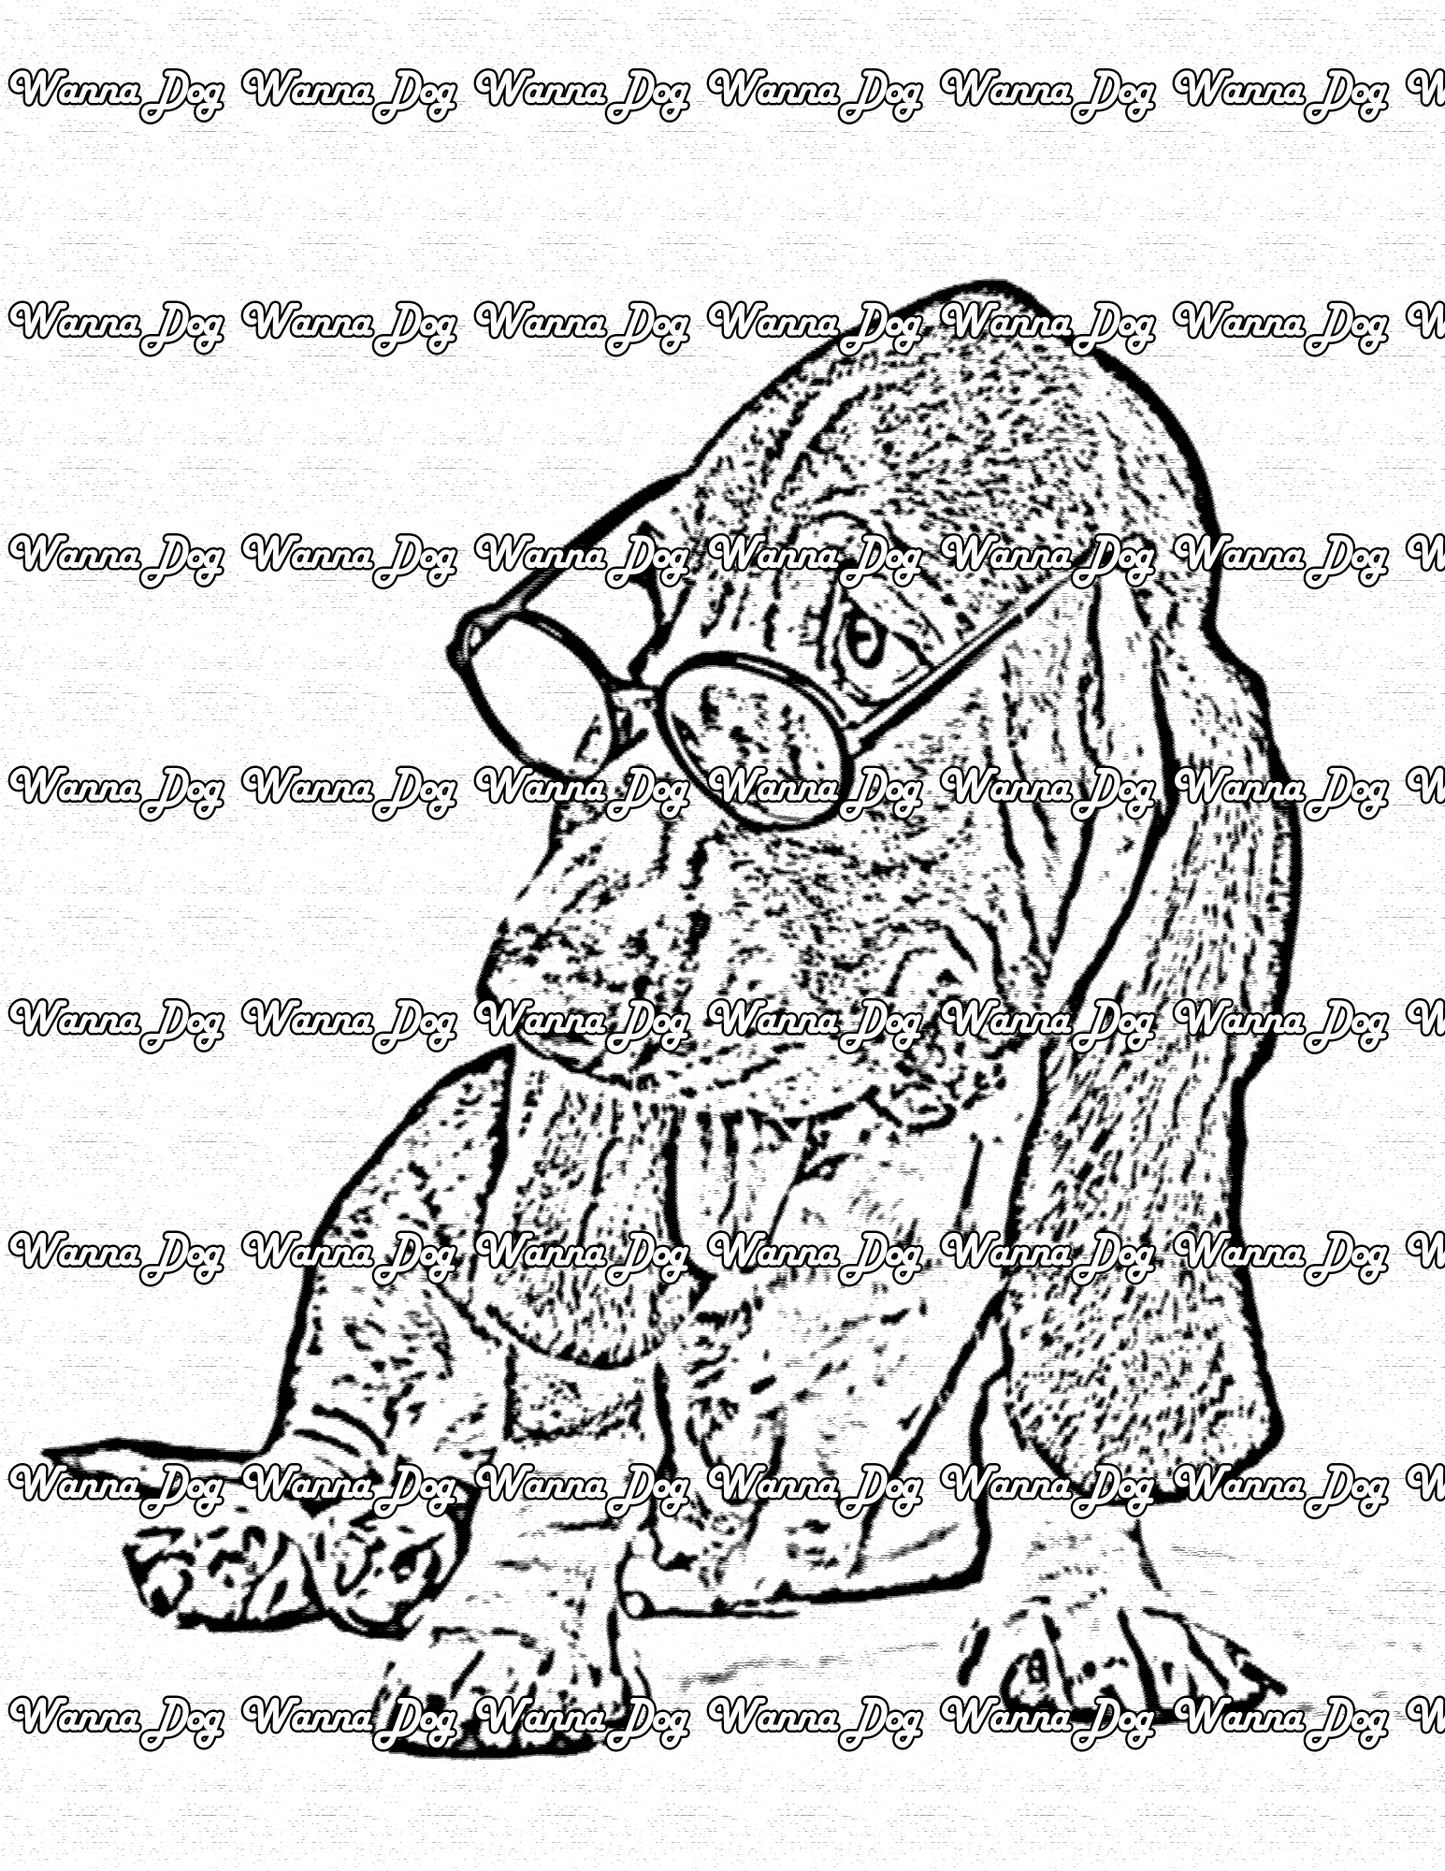 Basset Hound Coloring Page of a Basset Hound wearing glasses